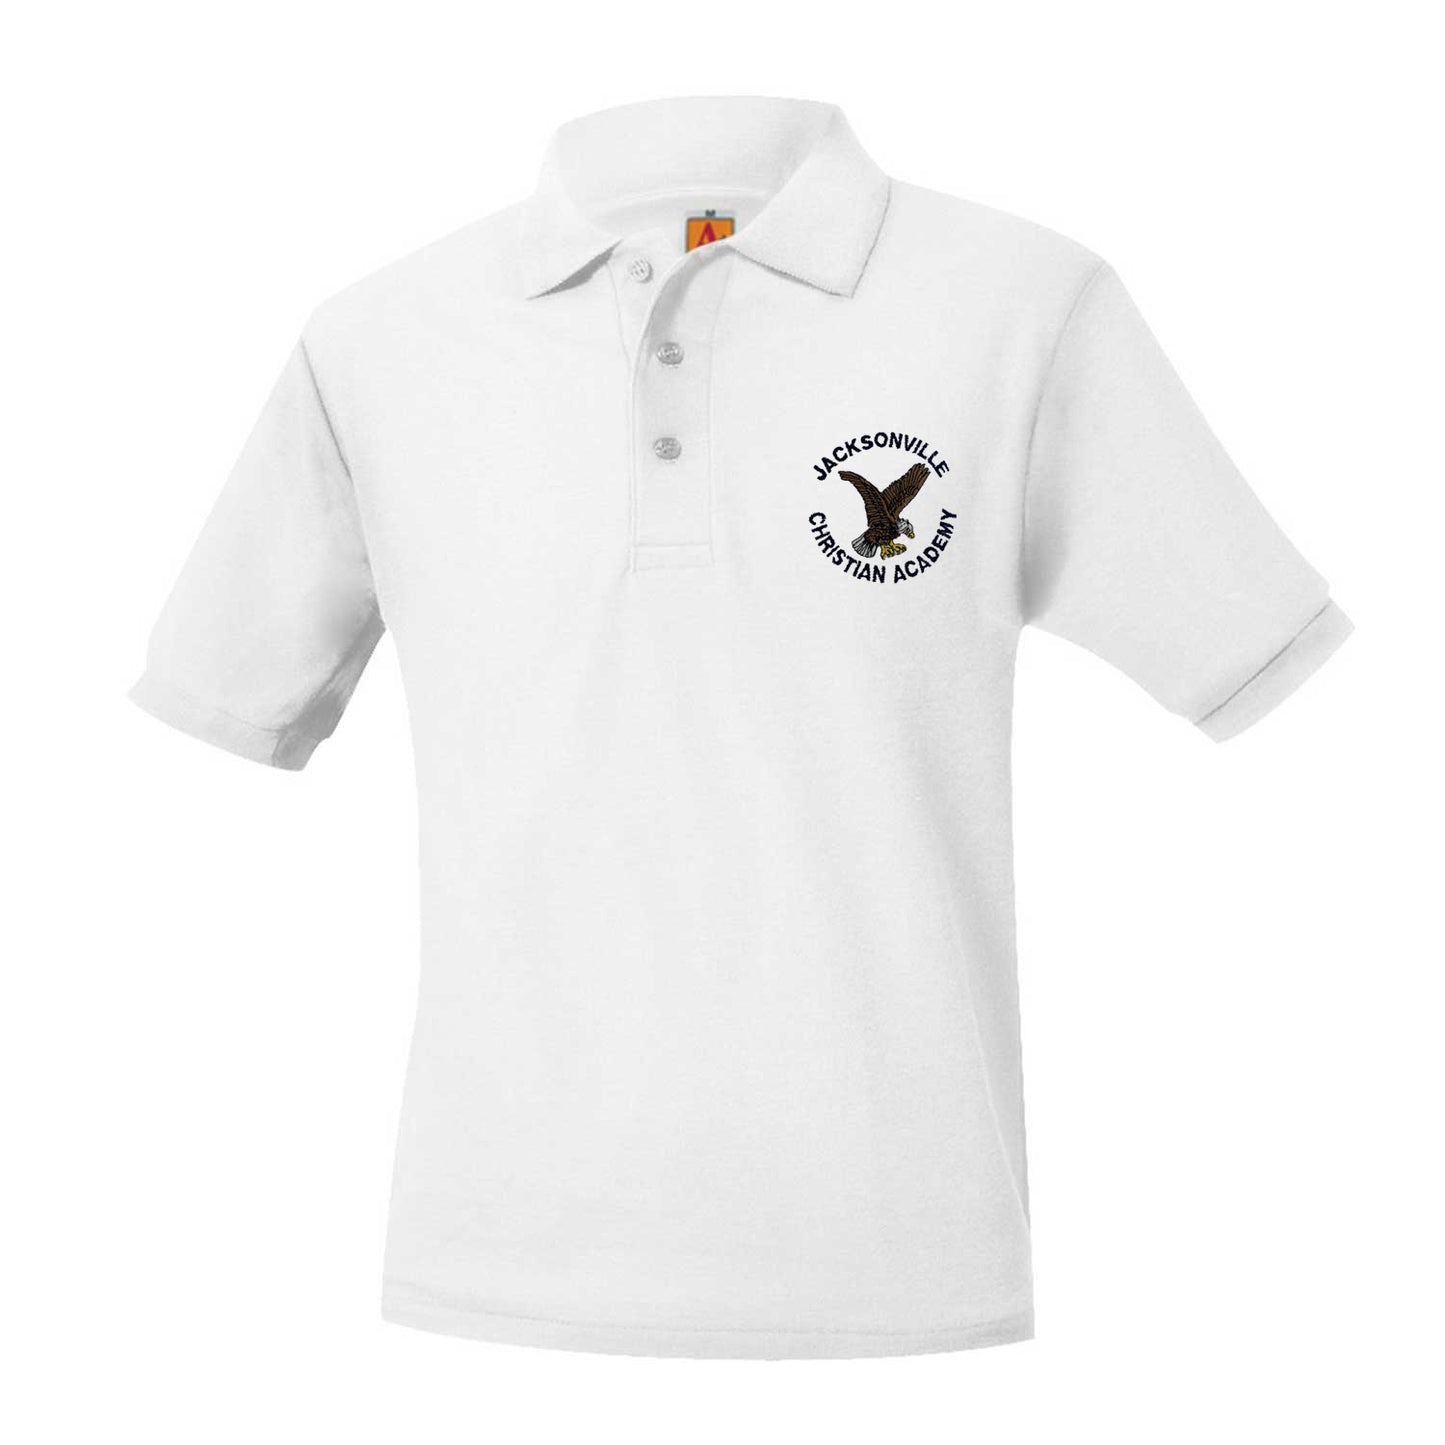 Adult Short Sleeve Pique Polo With Jacksonville Christian Logo